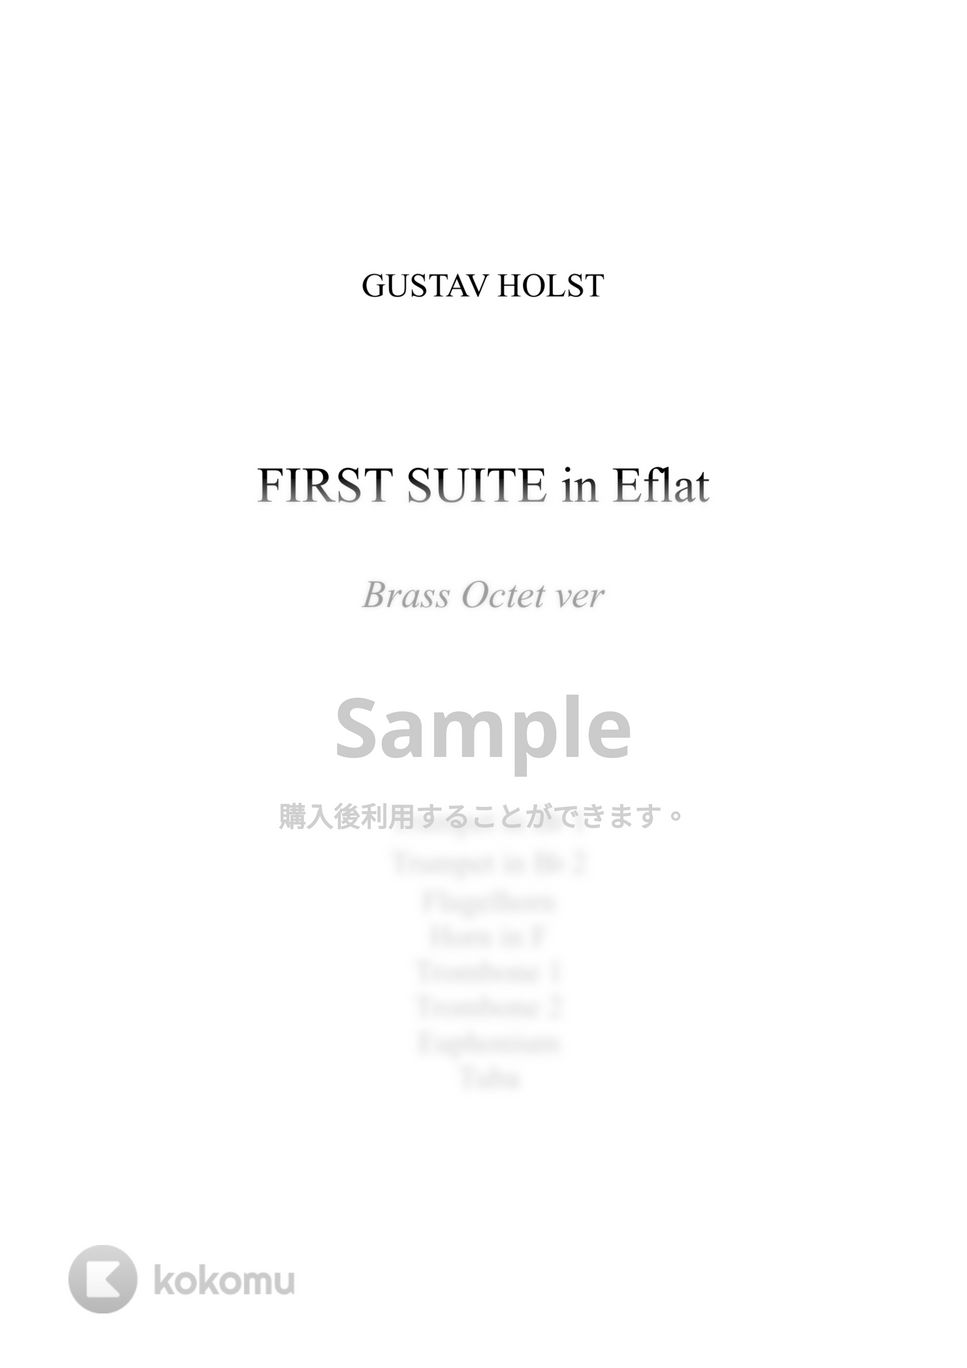 Gustav Holst - 吹奏楽のための第一組曲（Suite for Military Band） (金管八重奏) by マロニエミュージック